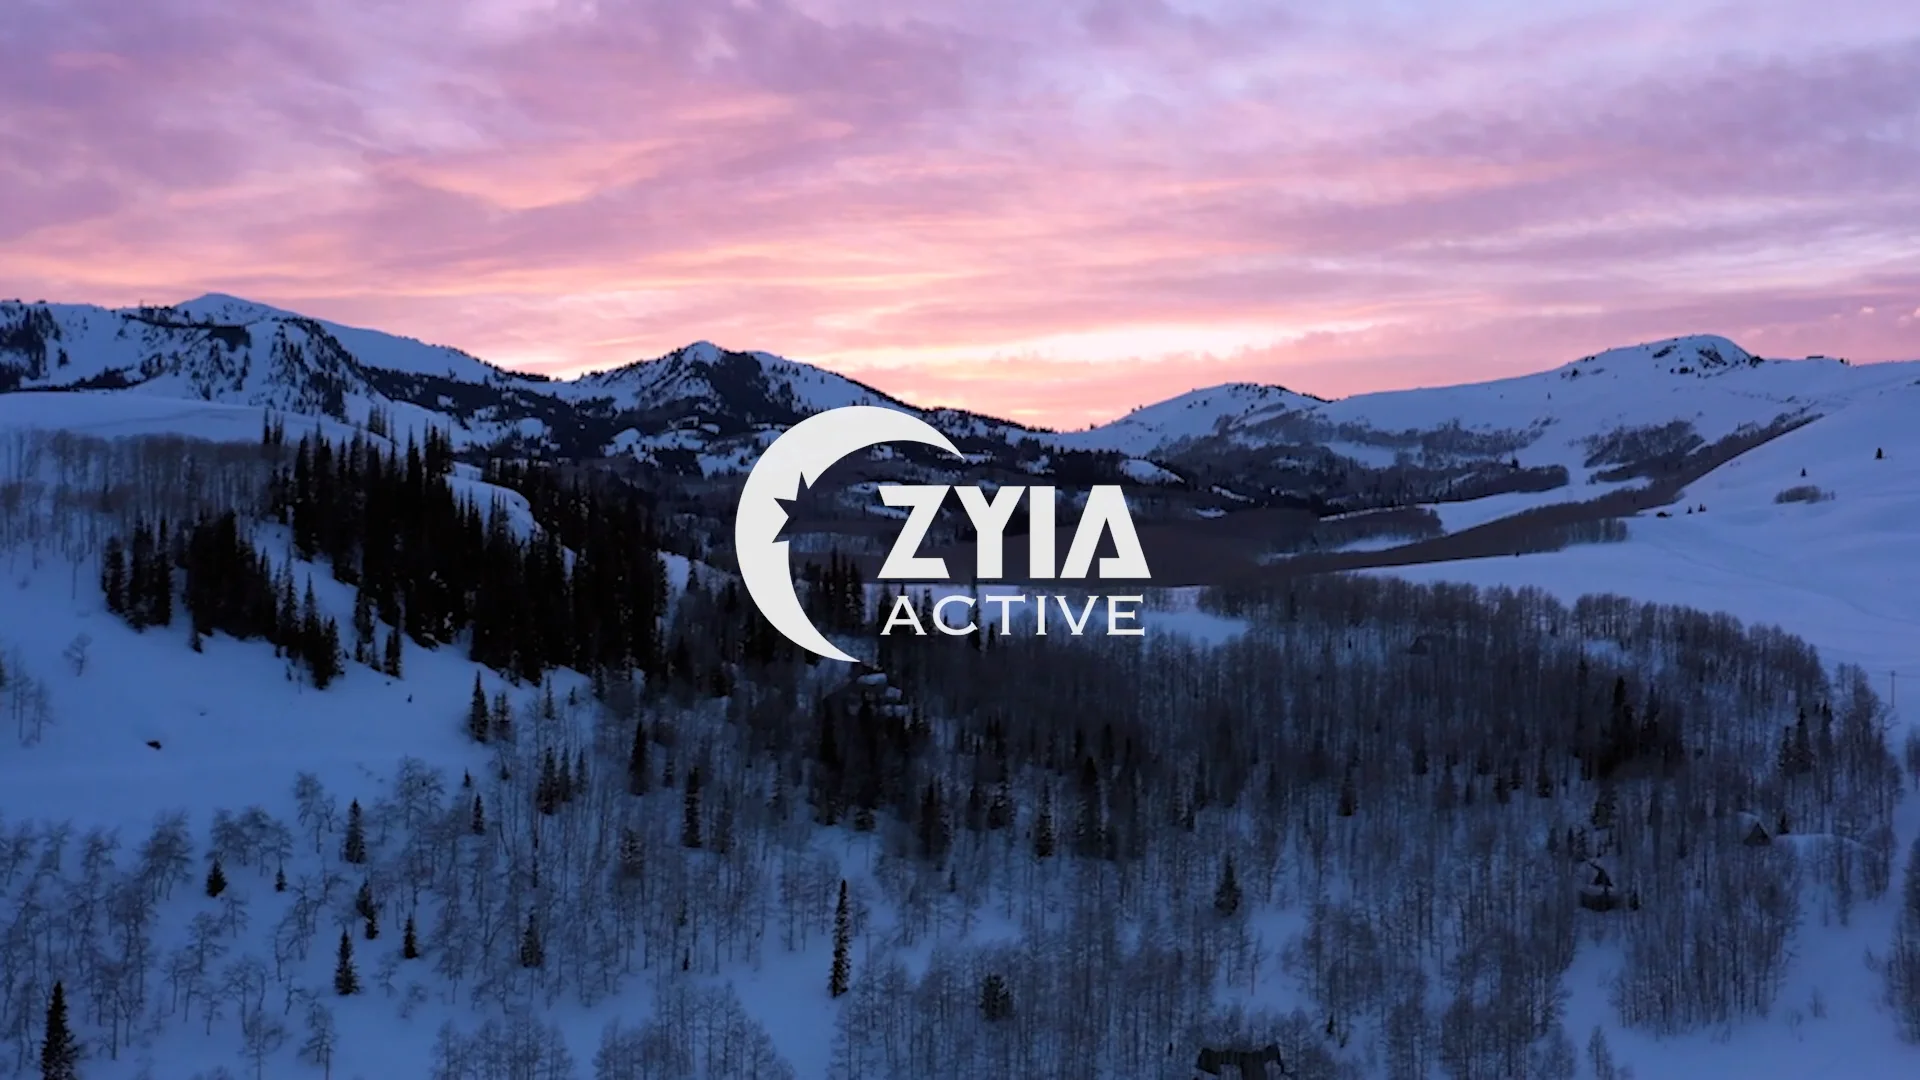 Your Zyia Journey